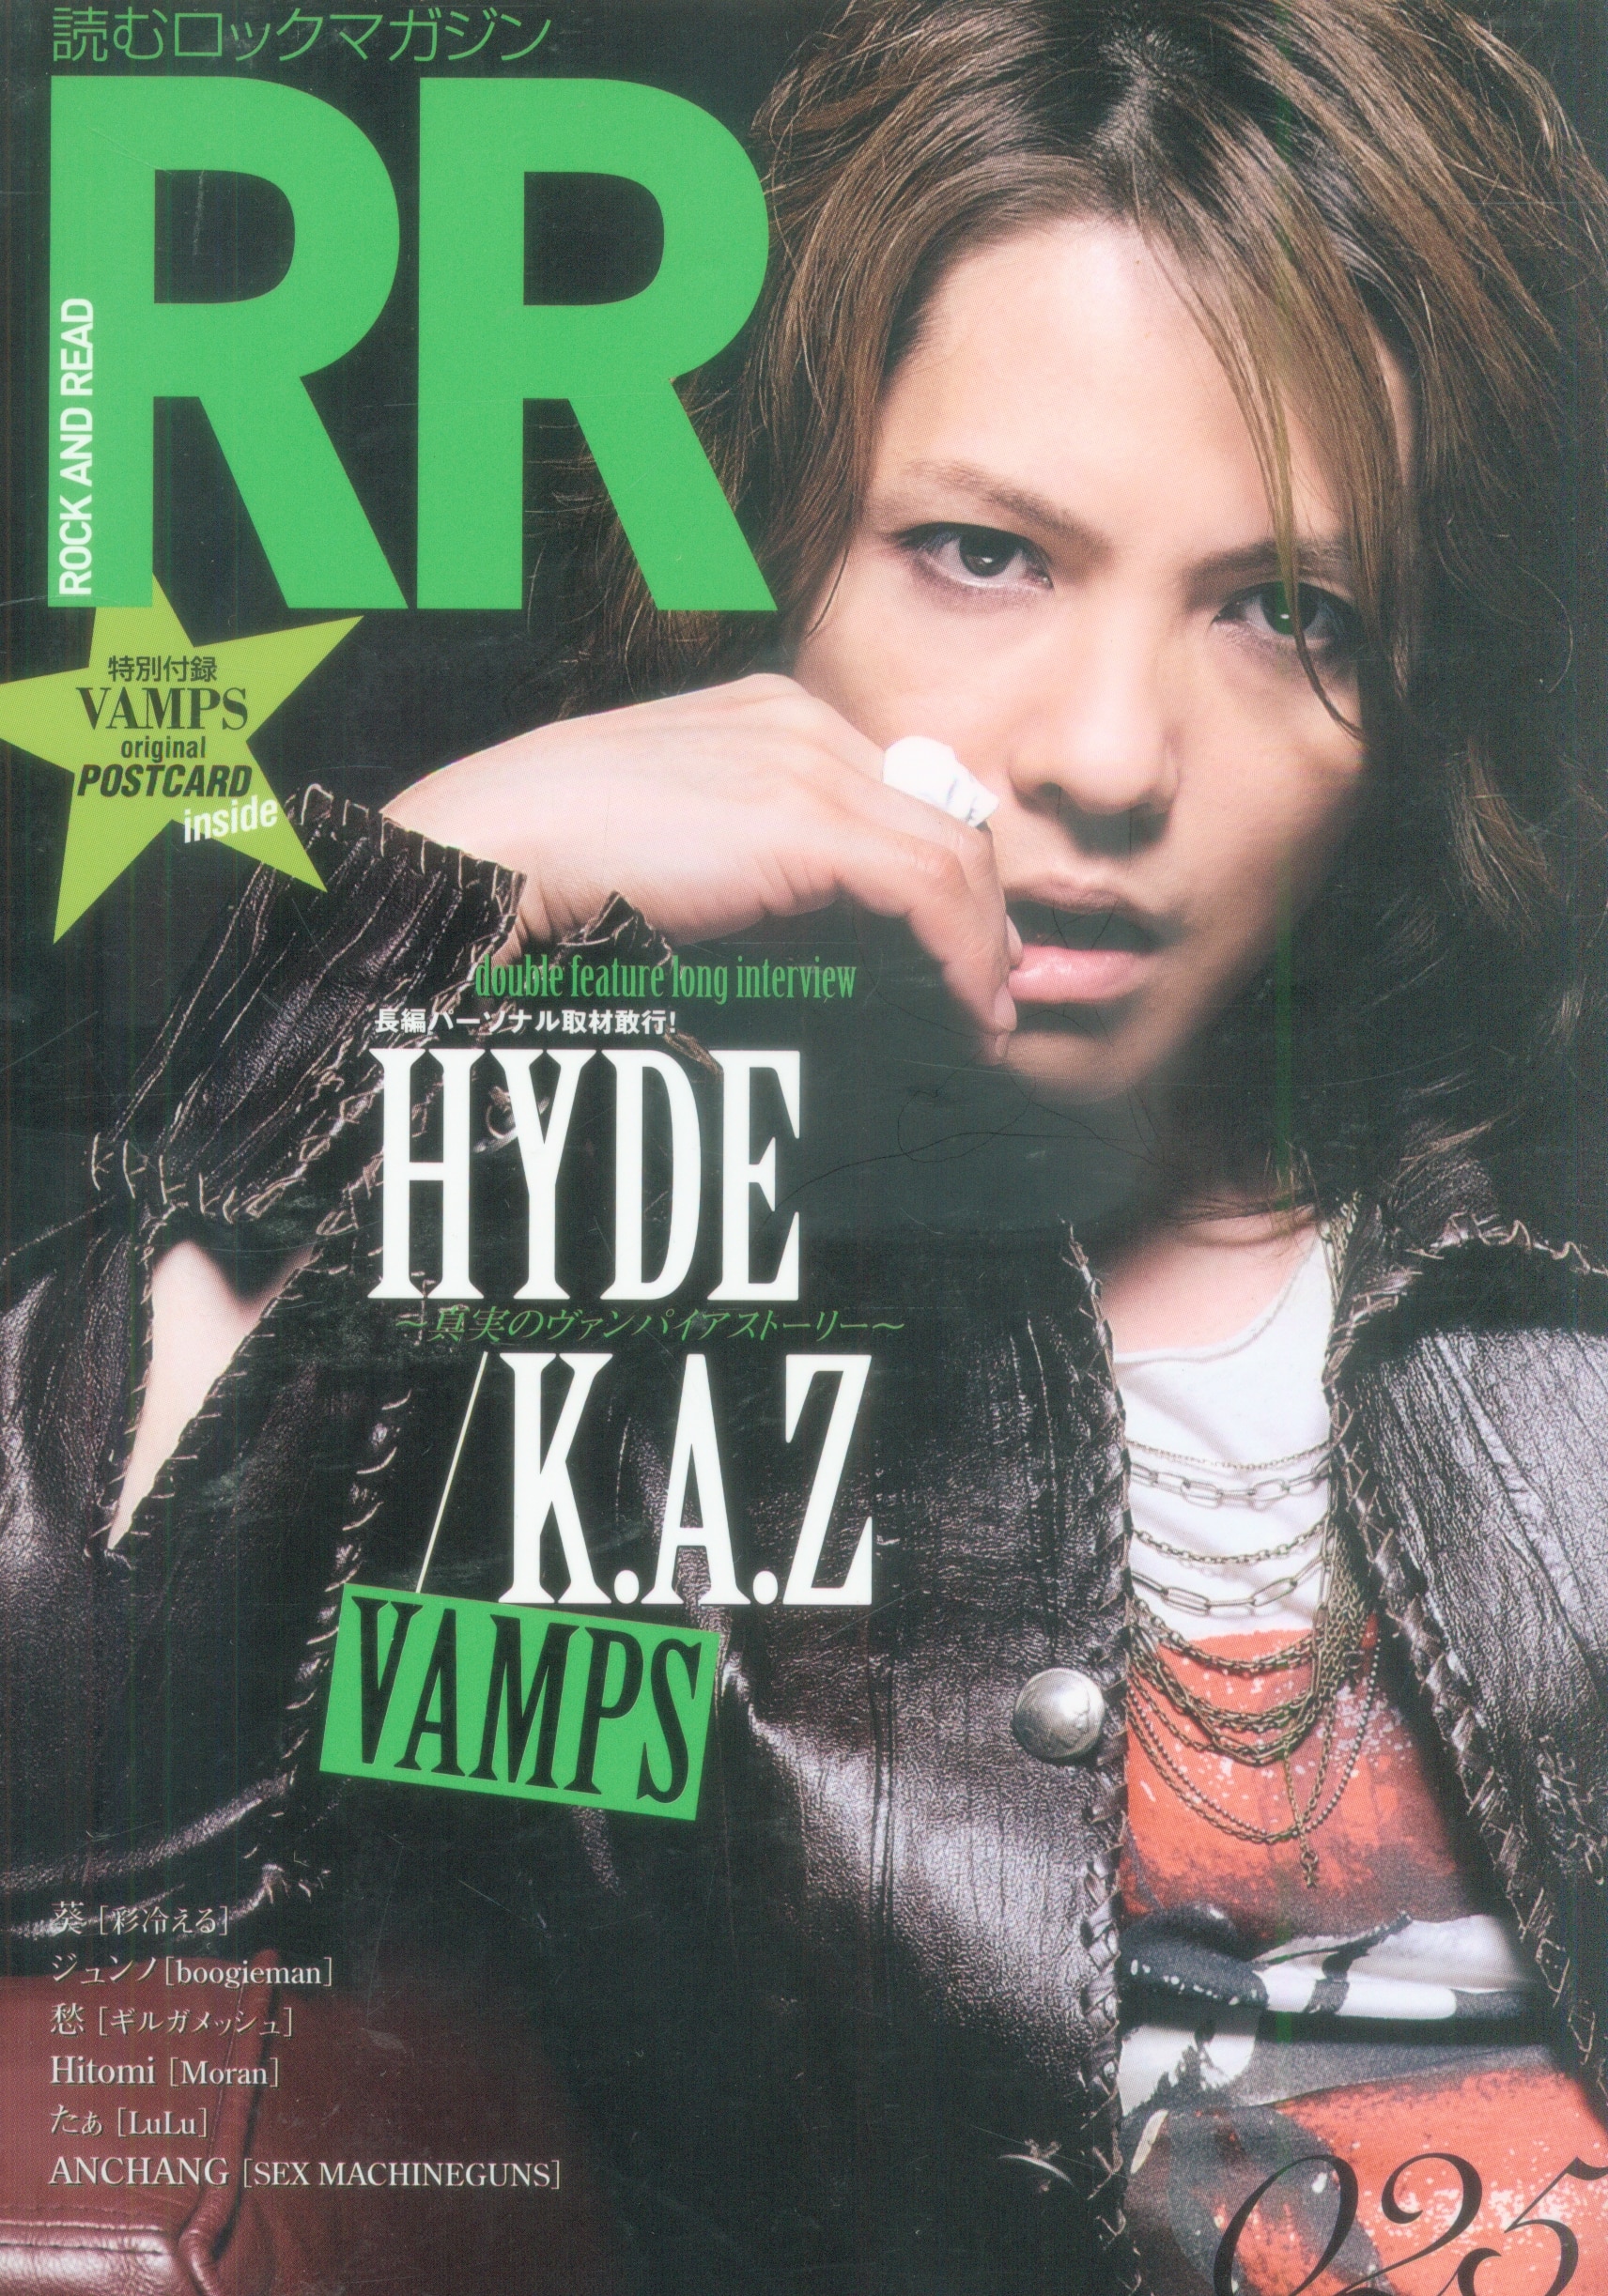 VAMPS HYDE / K.A.Z 雑誌 ROCK AND READ 025 | ありある